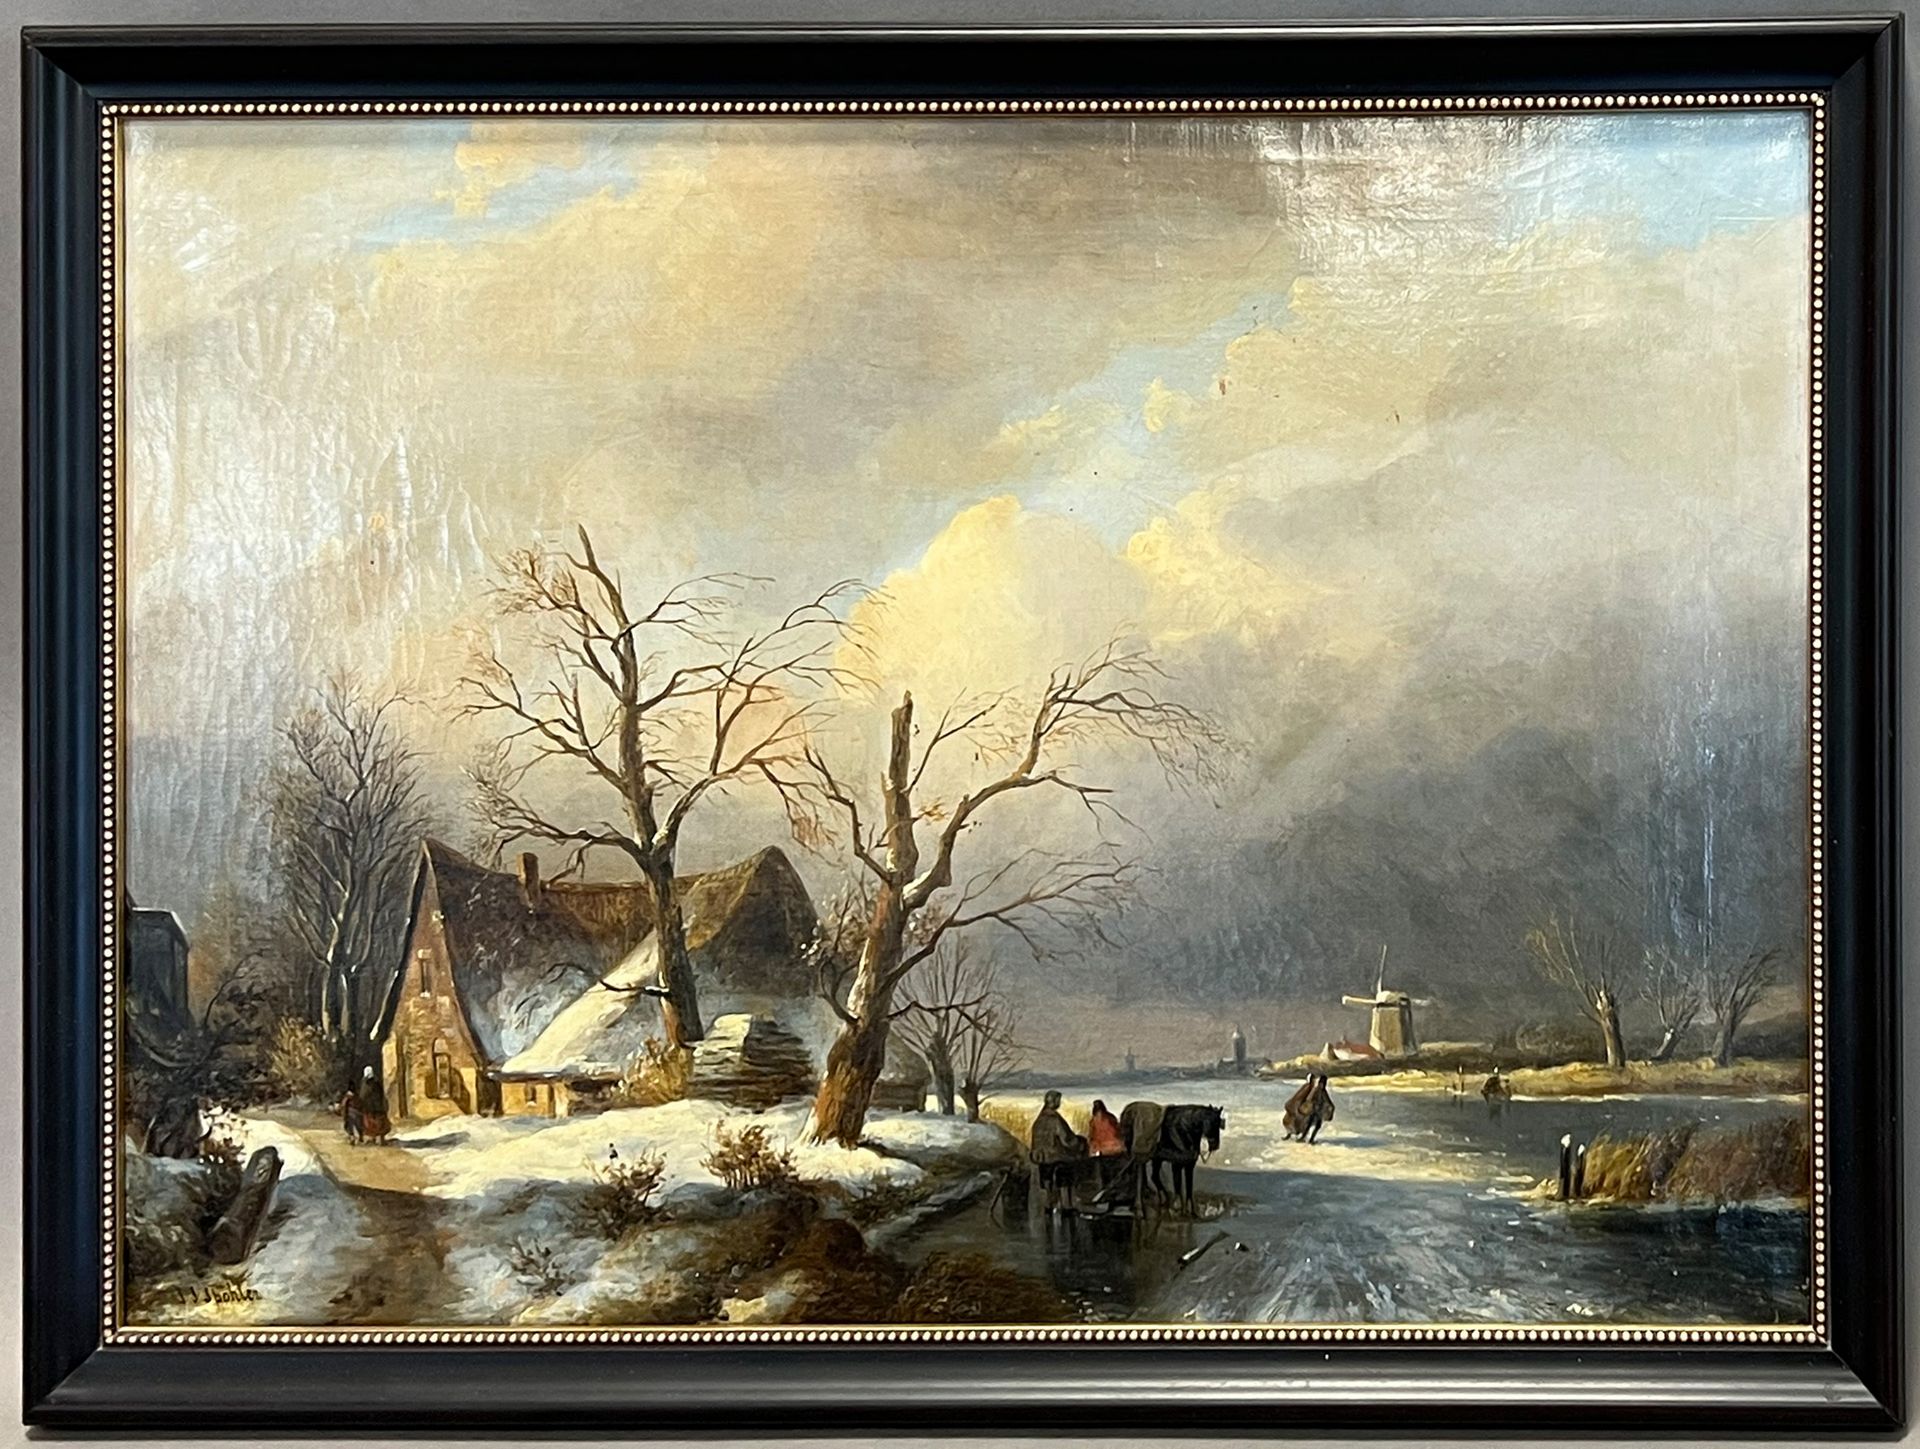 Attributed to Jacob Jan Coenraad SPOHLER (1837 - 1922). Dutch winter landscape. - Image 2 of 9